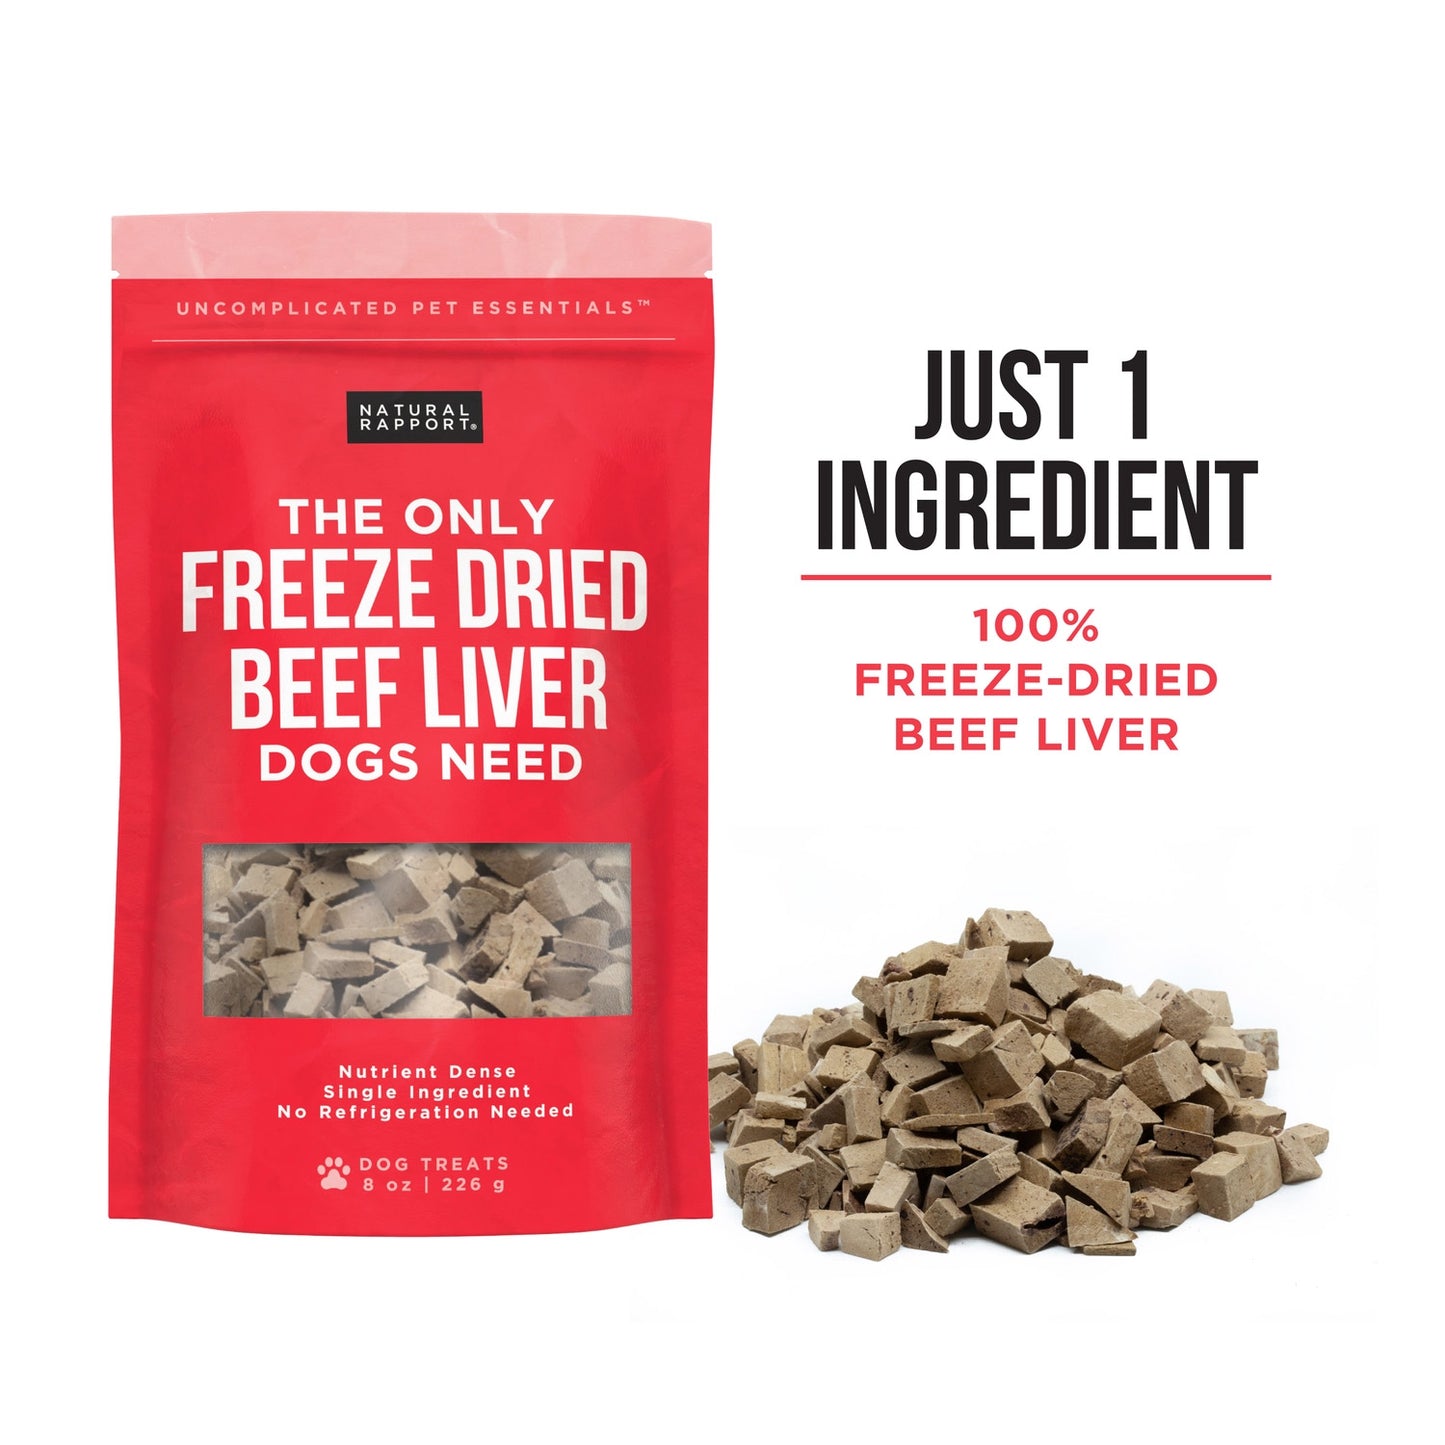 Only Freeze Dried Beef Liver Dogs Need